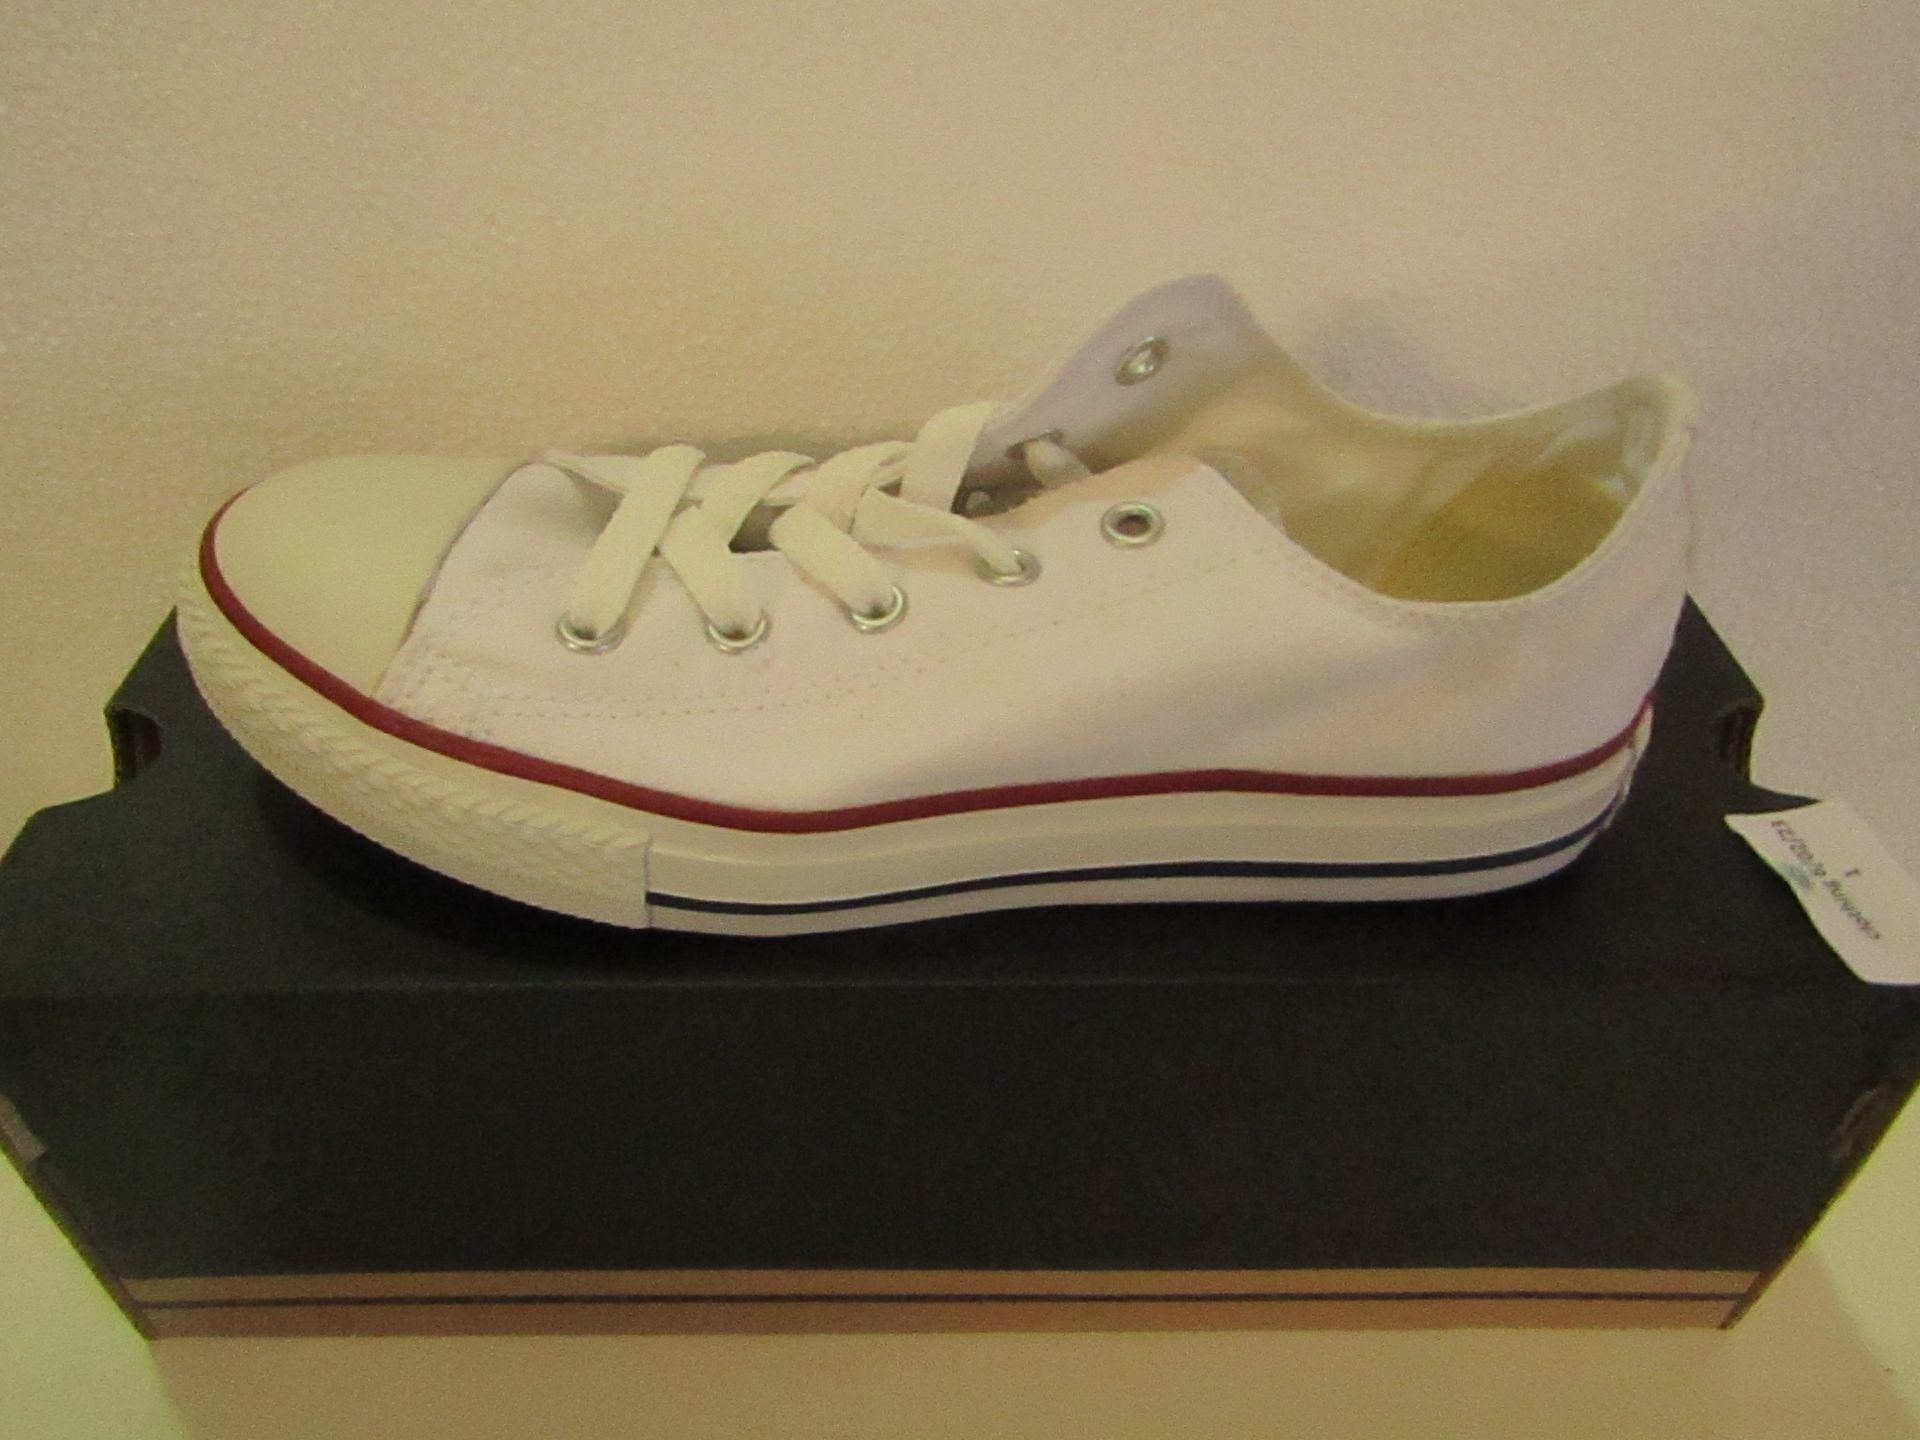 Converse All Star Optical White Canvas Trainer size UK 2.5 new & boxed